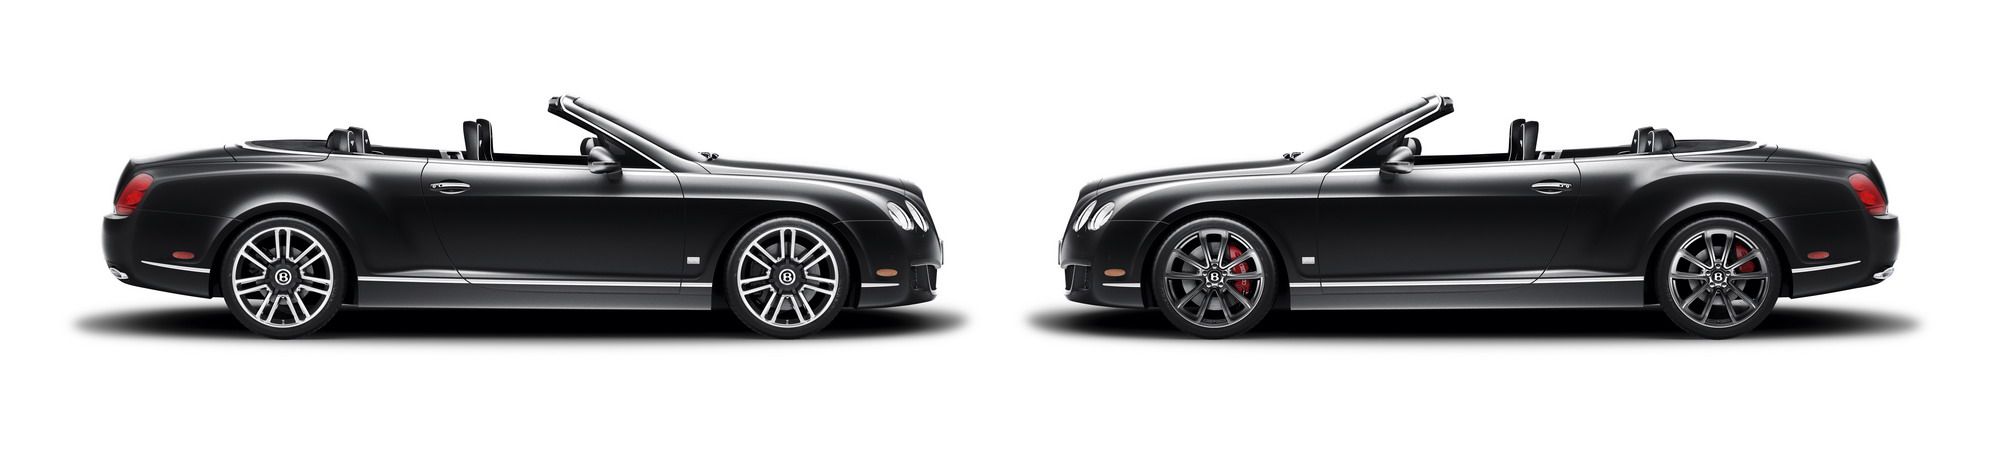 2011 Bentley Continental GTC and GTC Speed 80-11